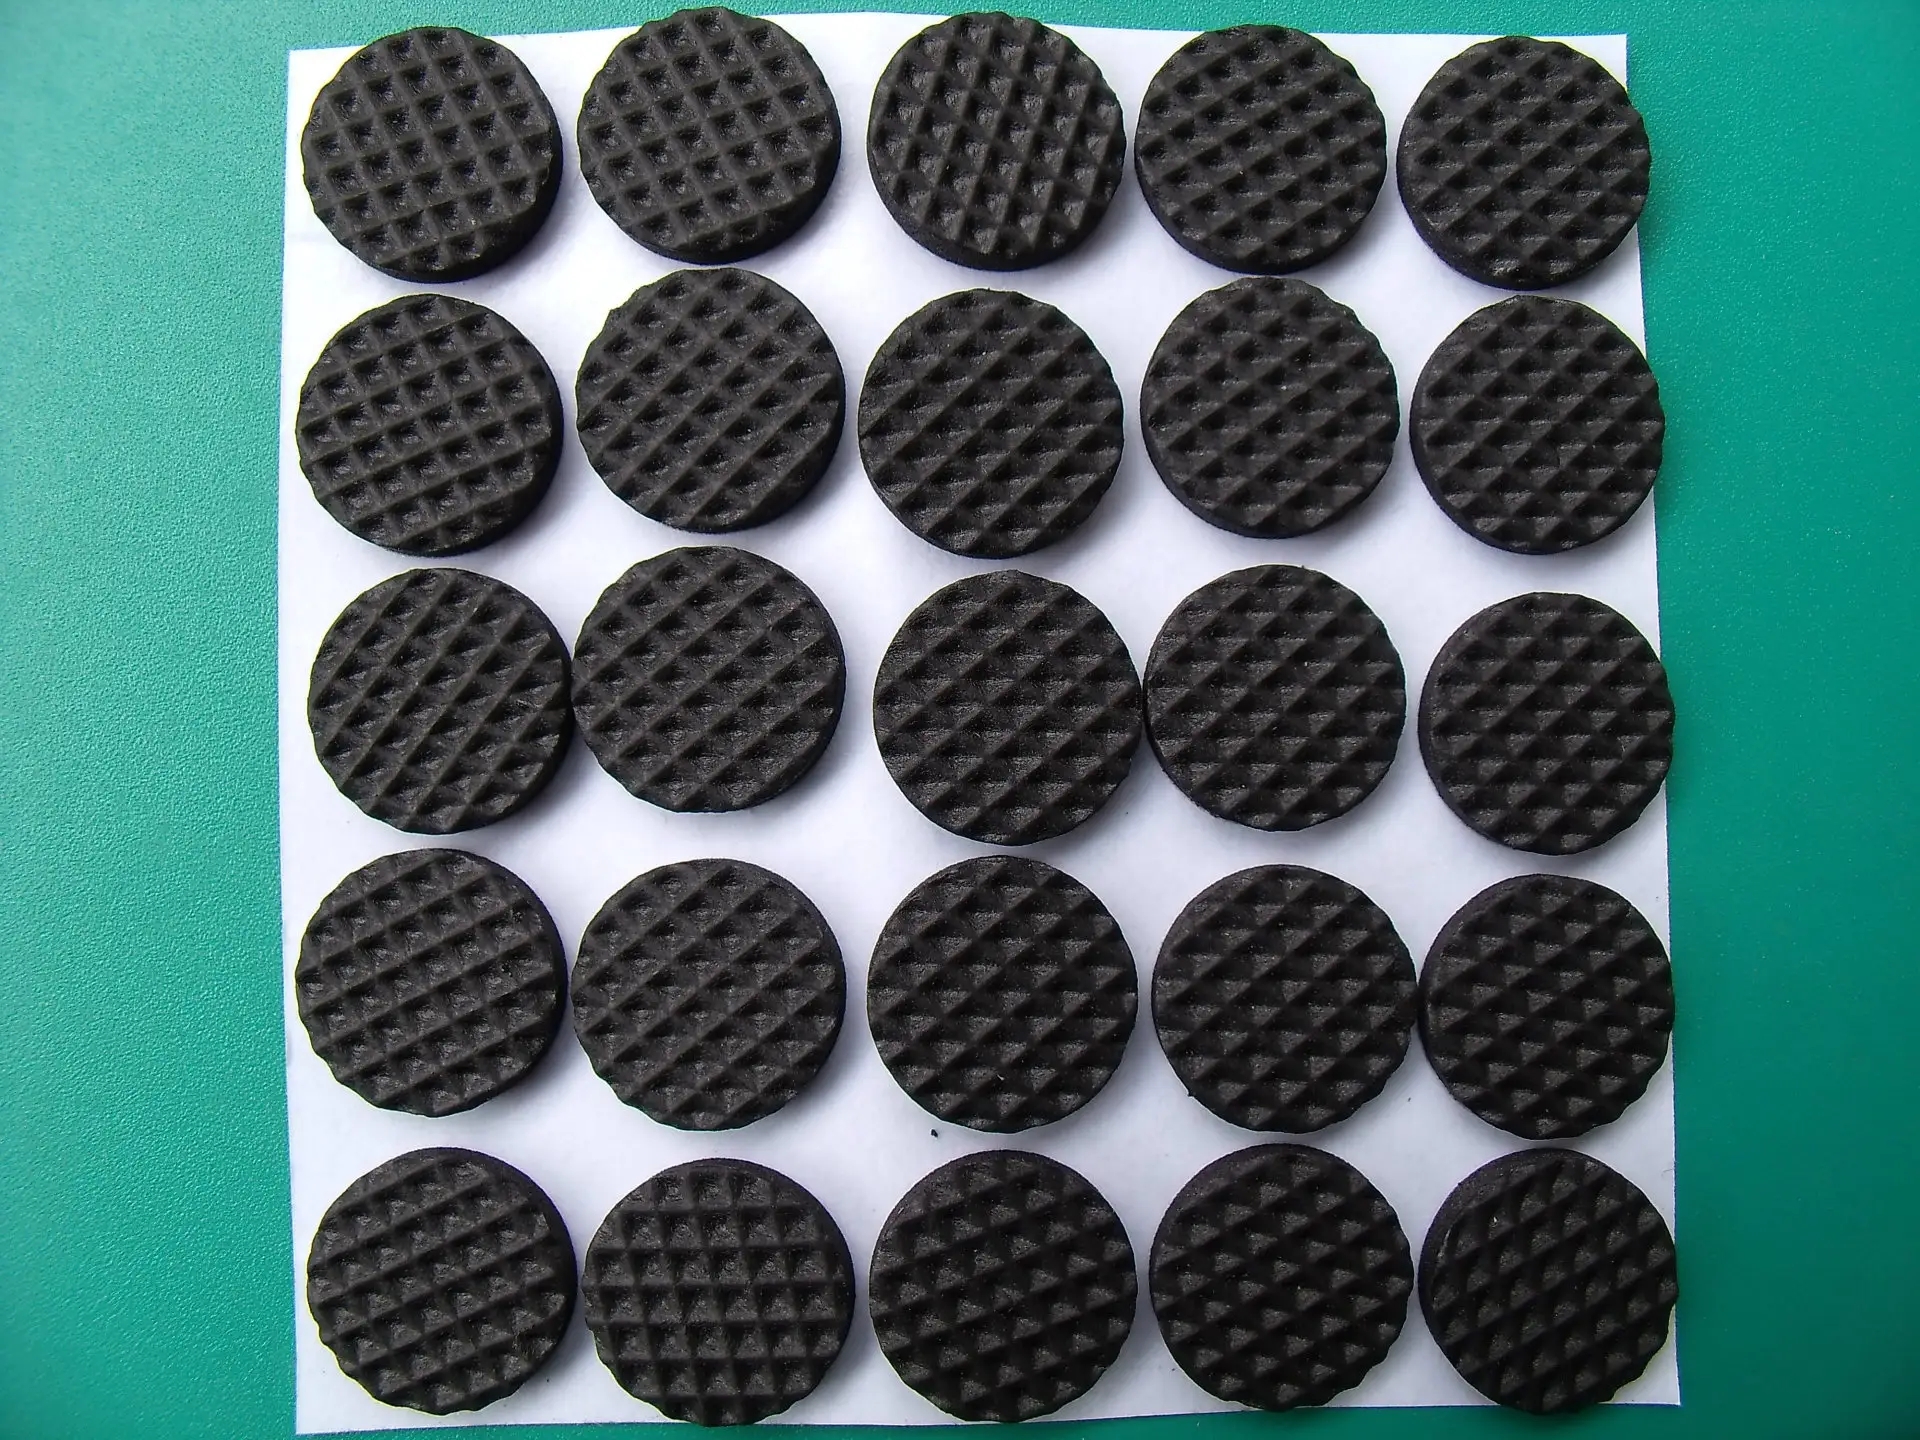 15 years of factory EVA rubber pad self-adhesive black and white EVA foot pad packaging processing customization